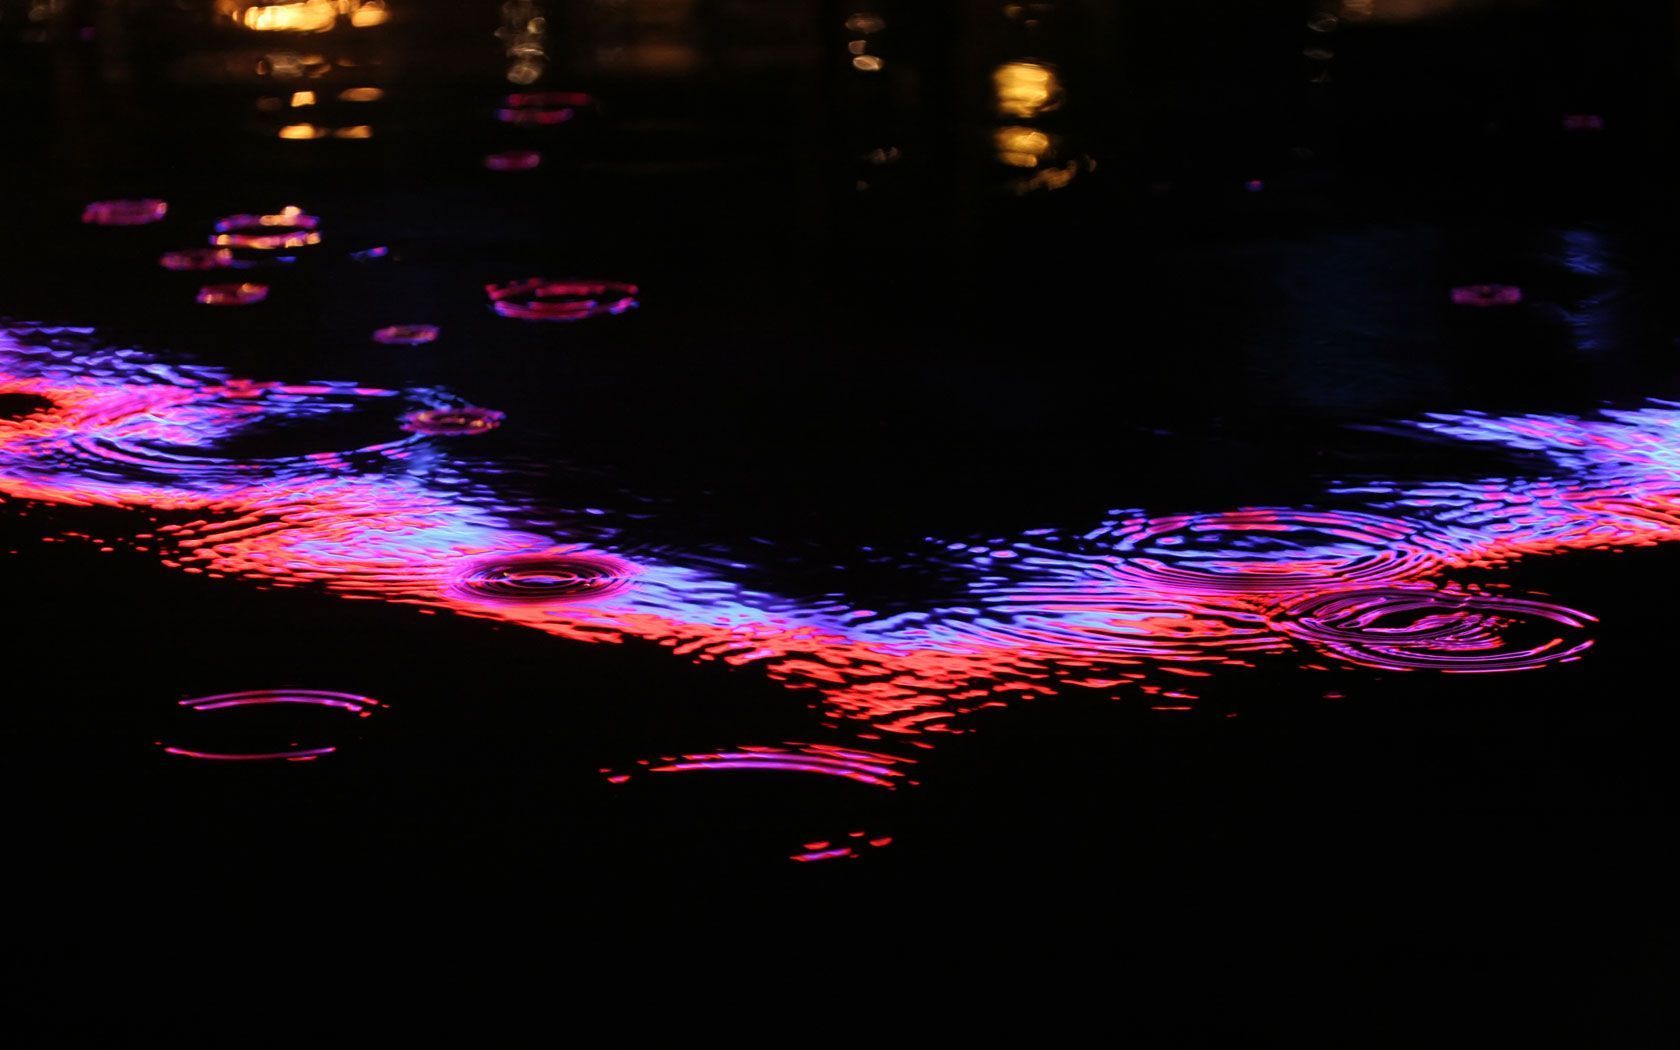 Raindrops on a black surface with a pink and blue light shining on them - Neon